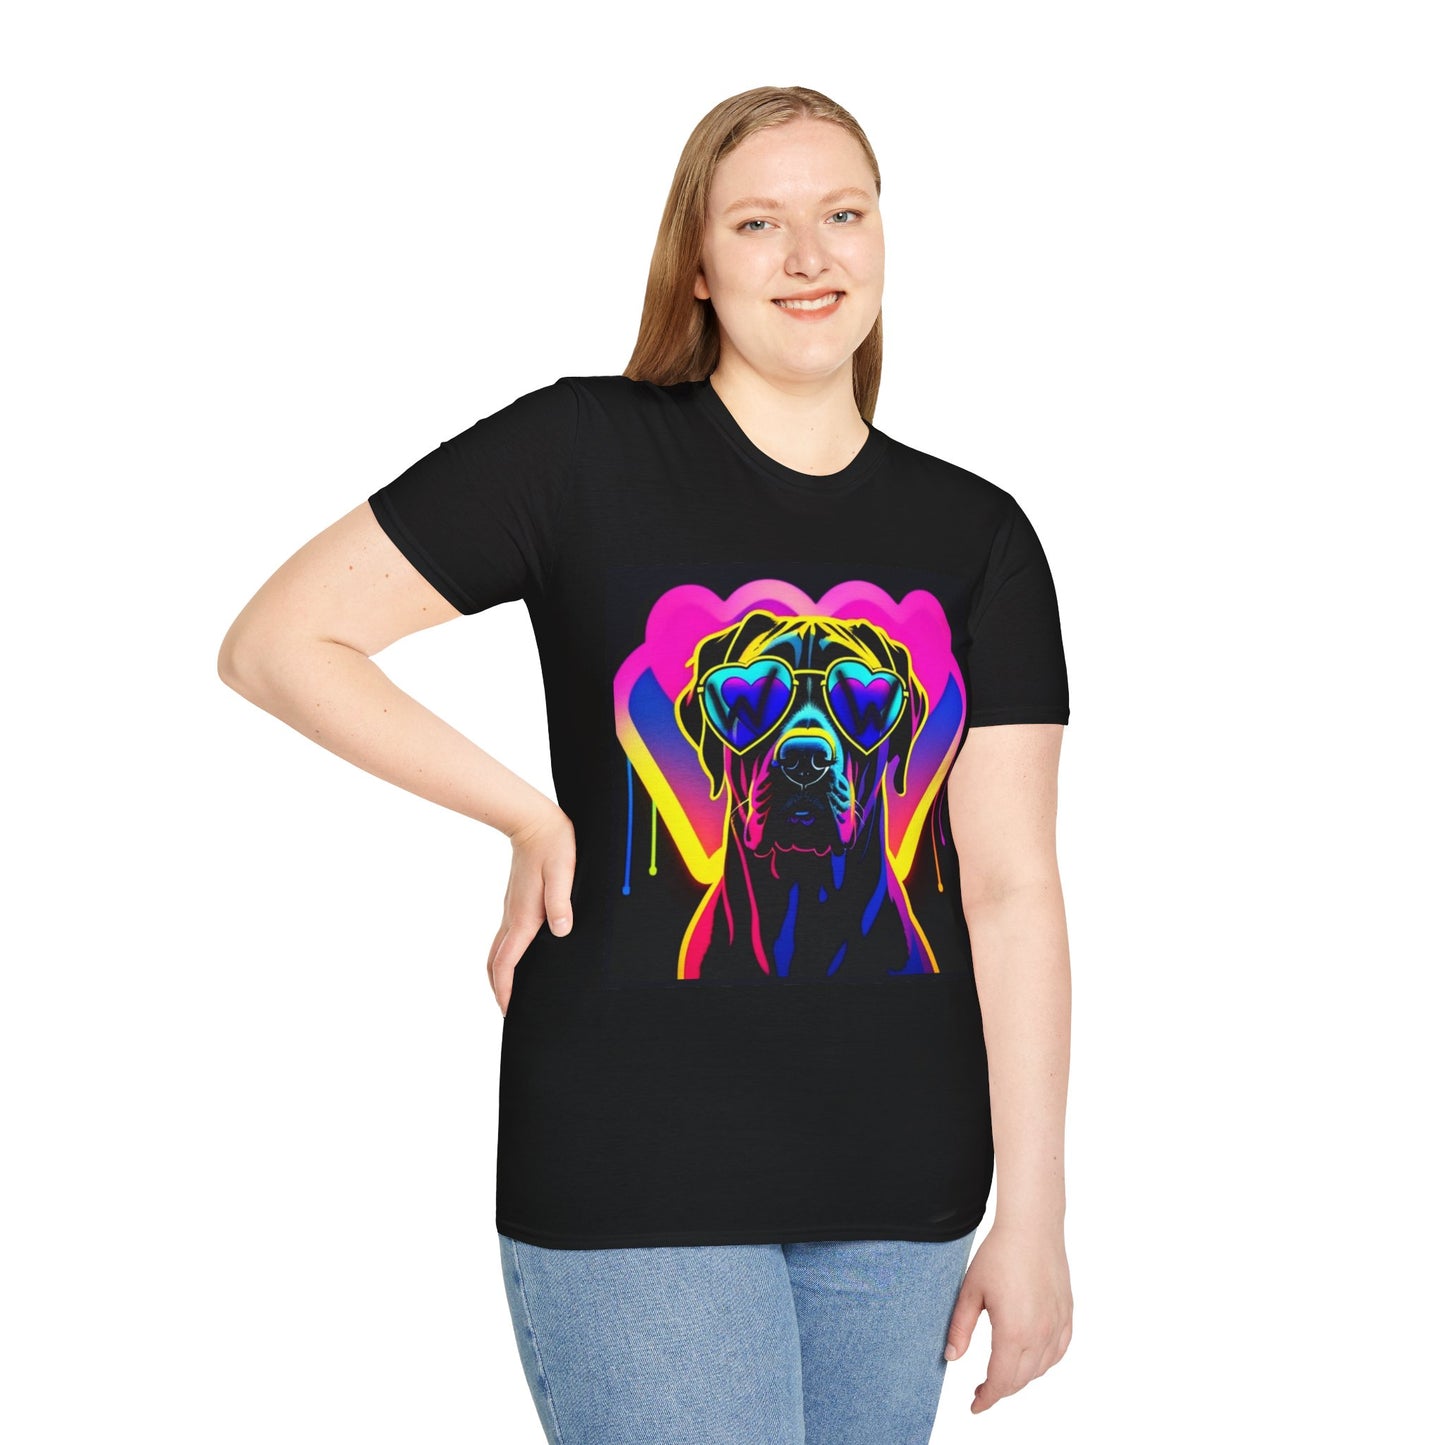 Brody's Electric Love Graphic Tee